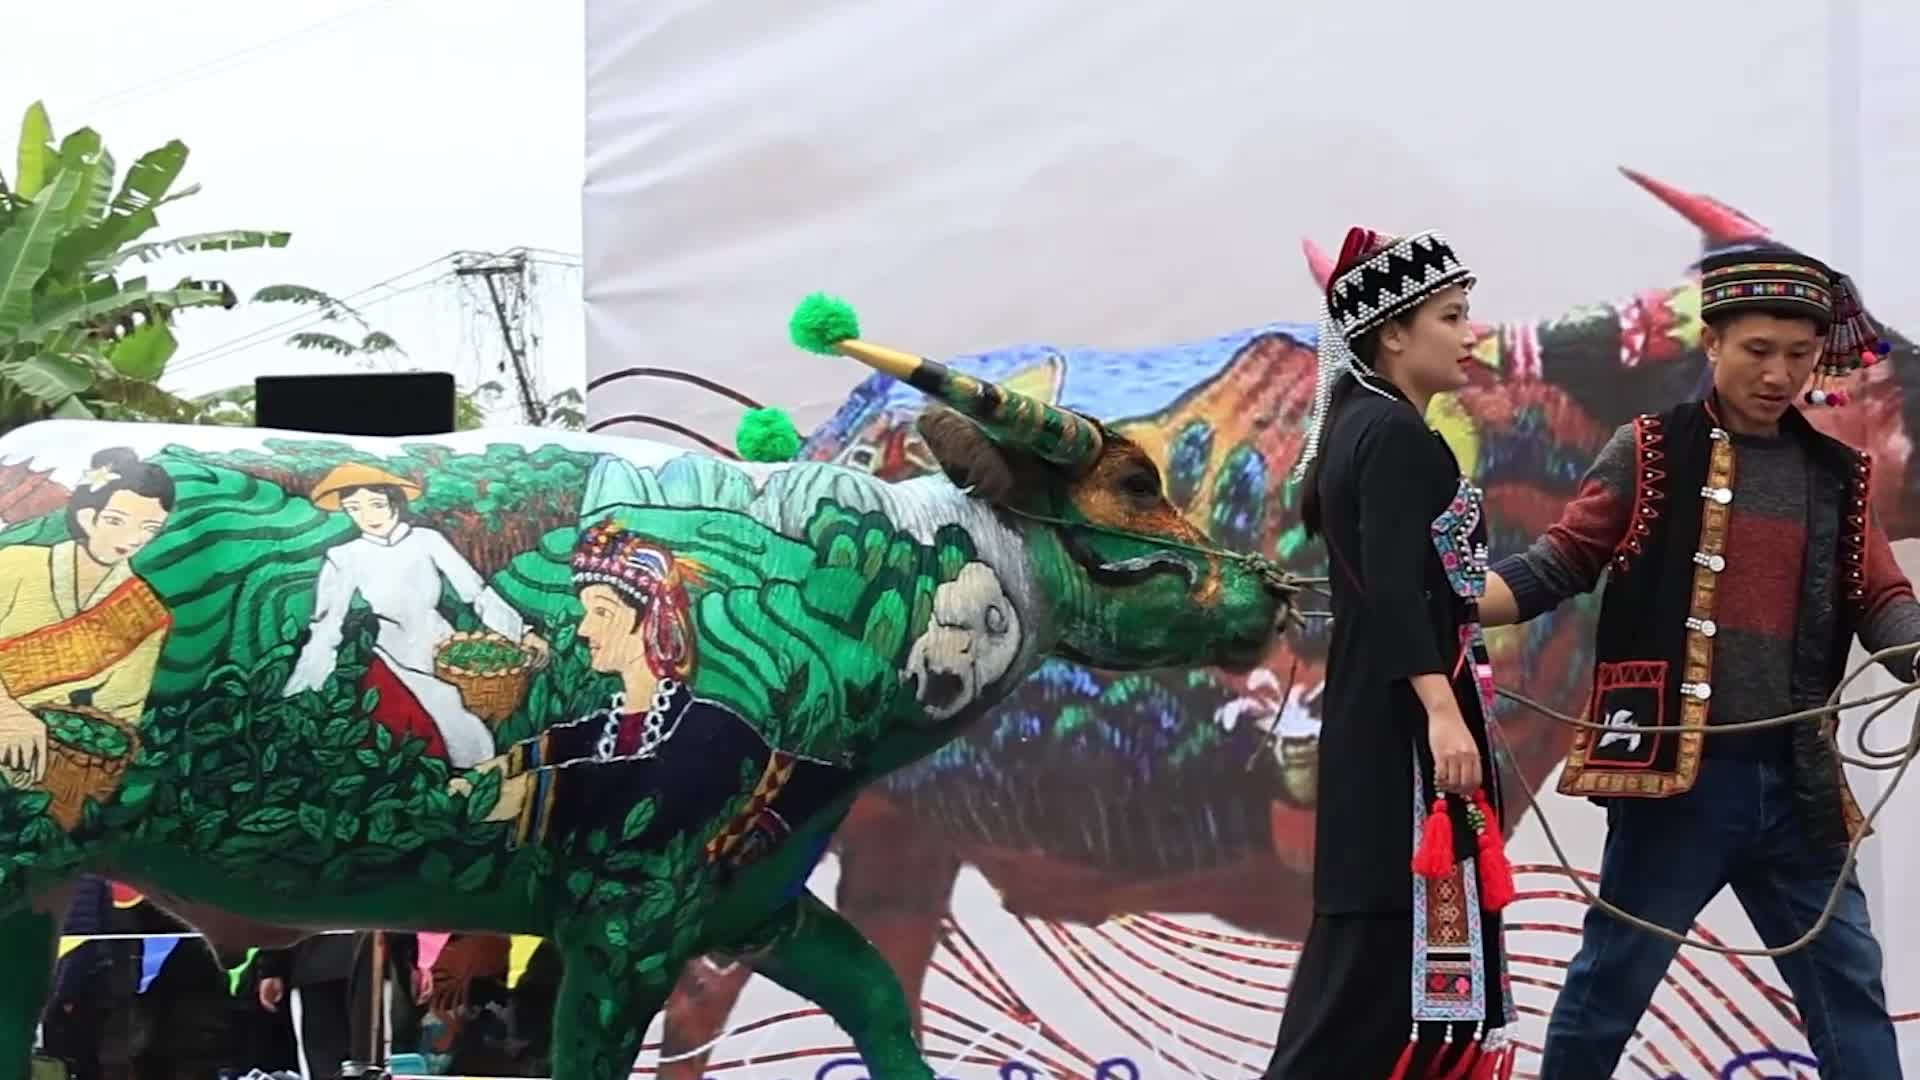 Ox body painting competition held in SW China's Yunnan